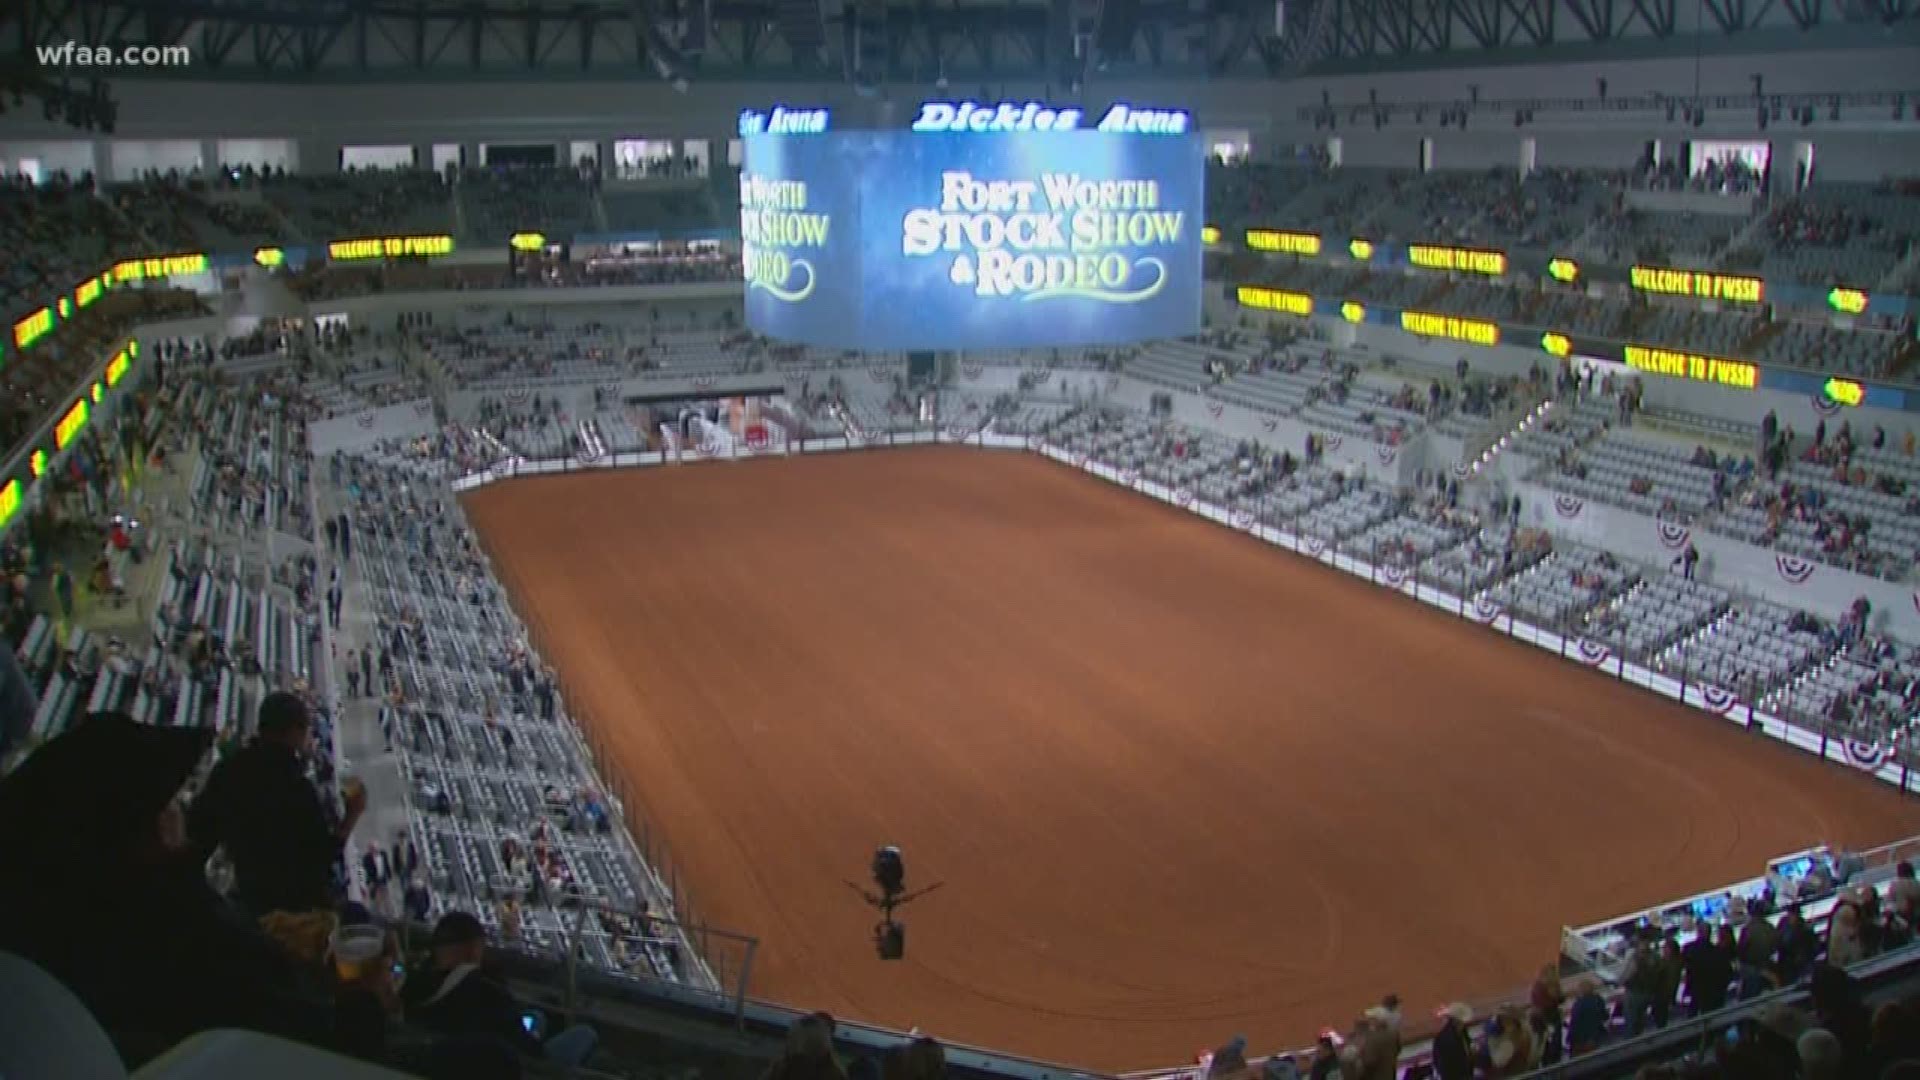 The FWSSR is the oldest livestock show and rodeo that is continuously running. The Dickies Arena is just its third indoor arena to call home.